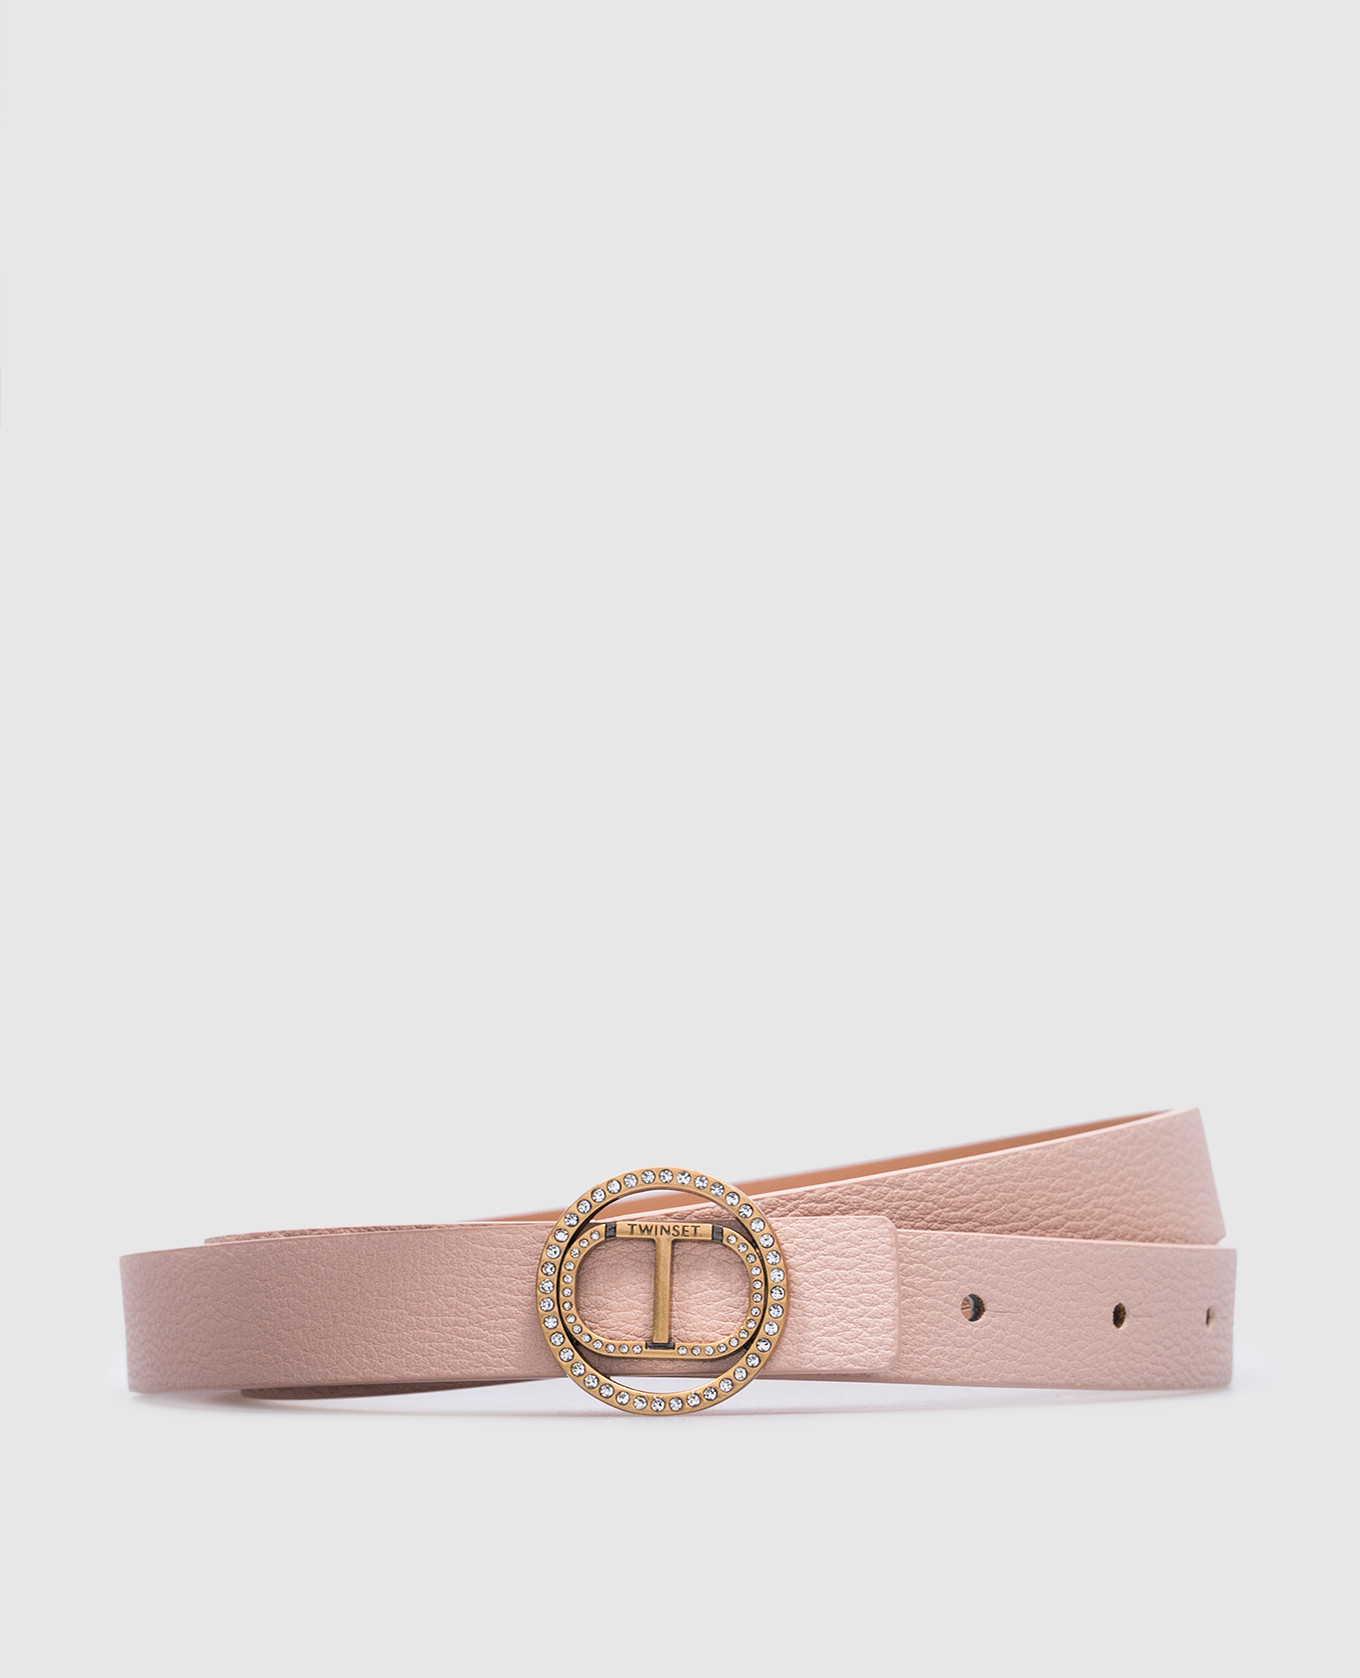 Pink belt with logo and crystals